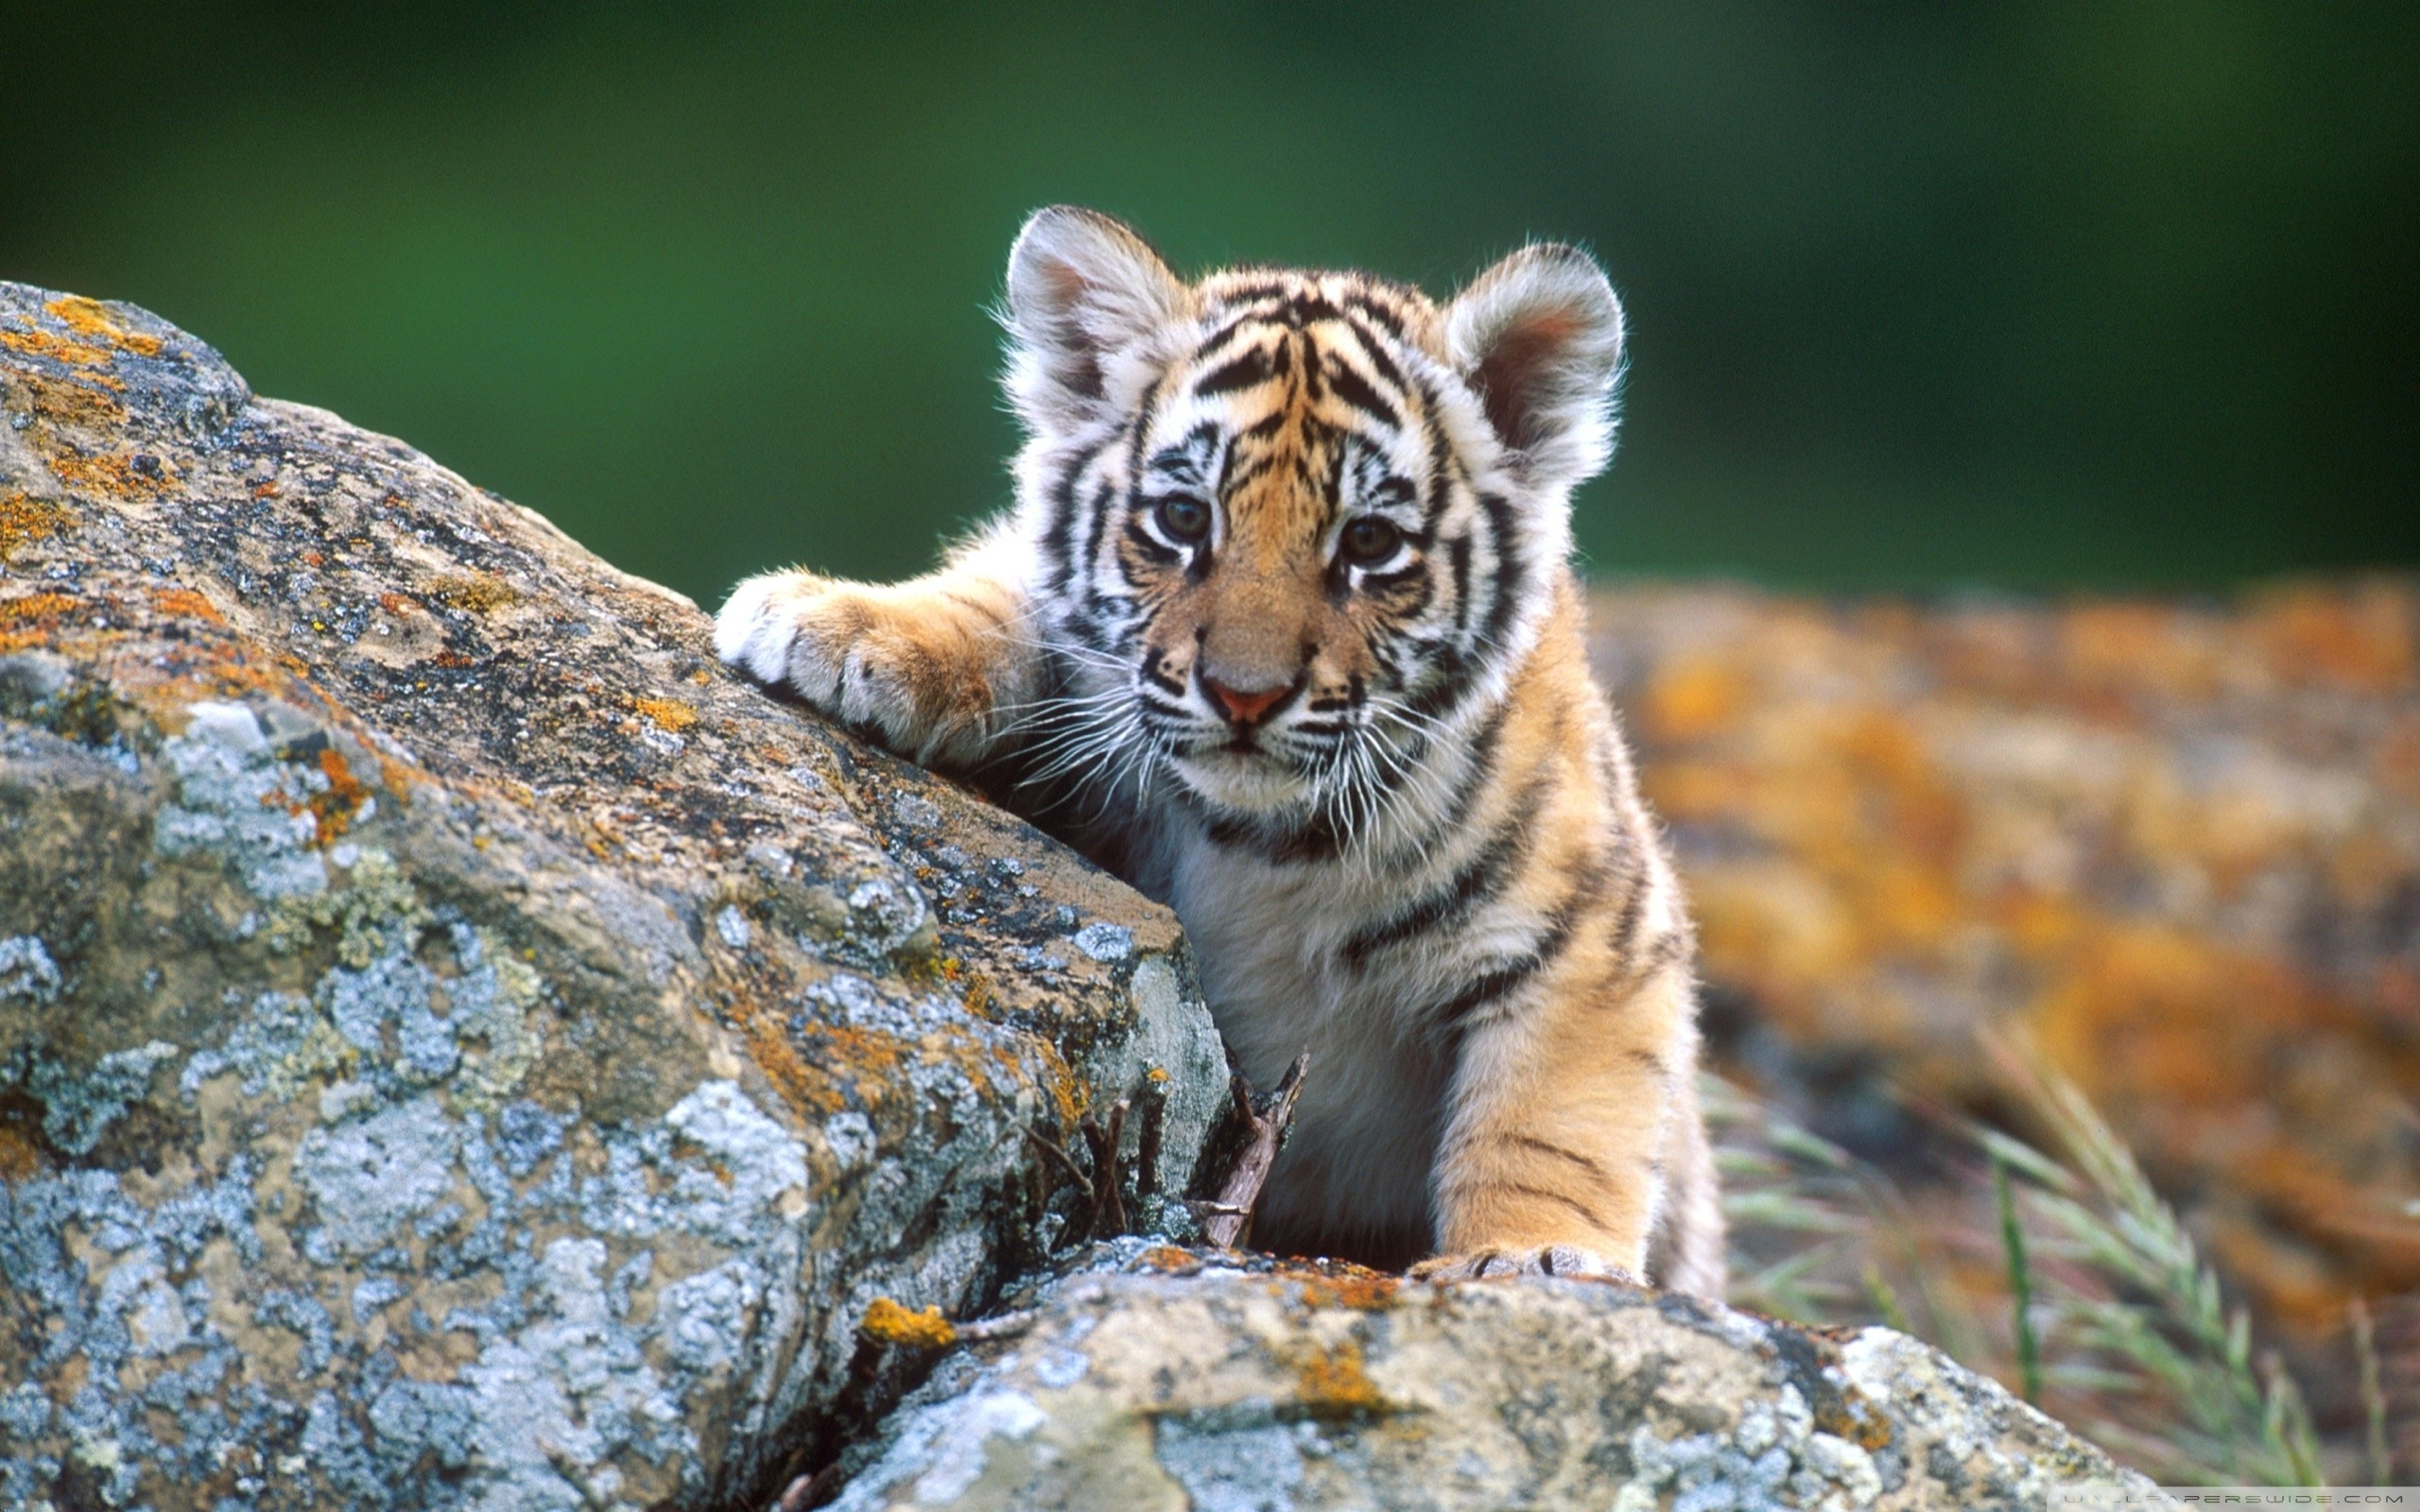 Coolest Tiger With Cubs Wallpaper 2560x1600